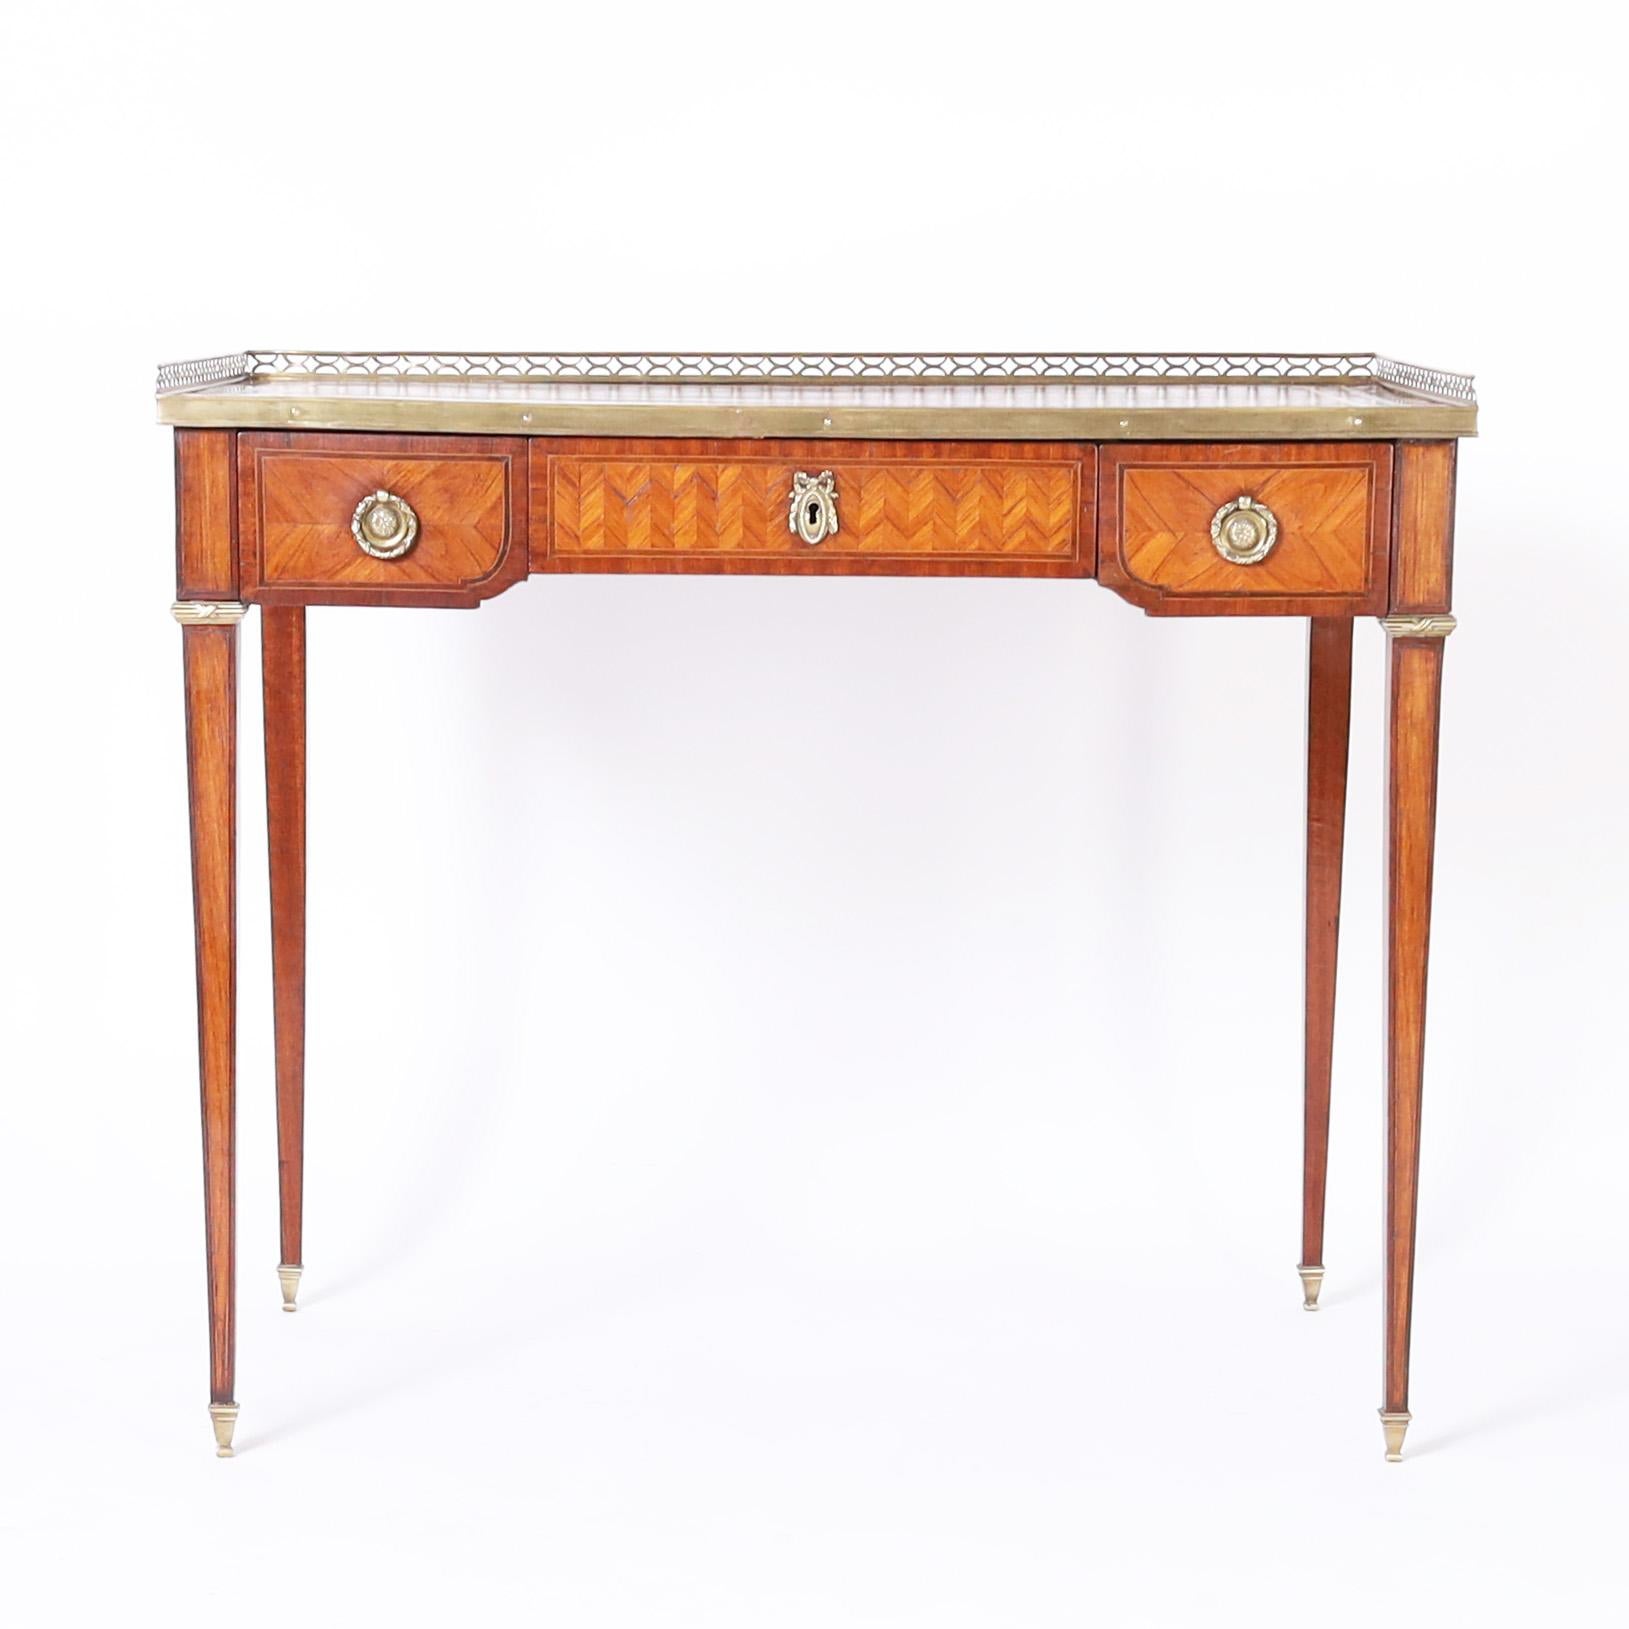 Refined antique French Louis XVI style writing desk crafted in exotic tulipwood veneer with crossbanding and chevron designs, having a tooled leather top with a brass gallery, the case has three drawers and is supported by long elegant tapered legs